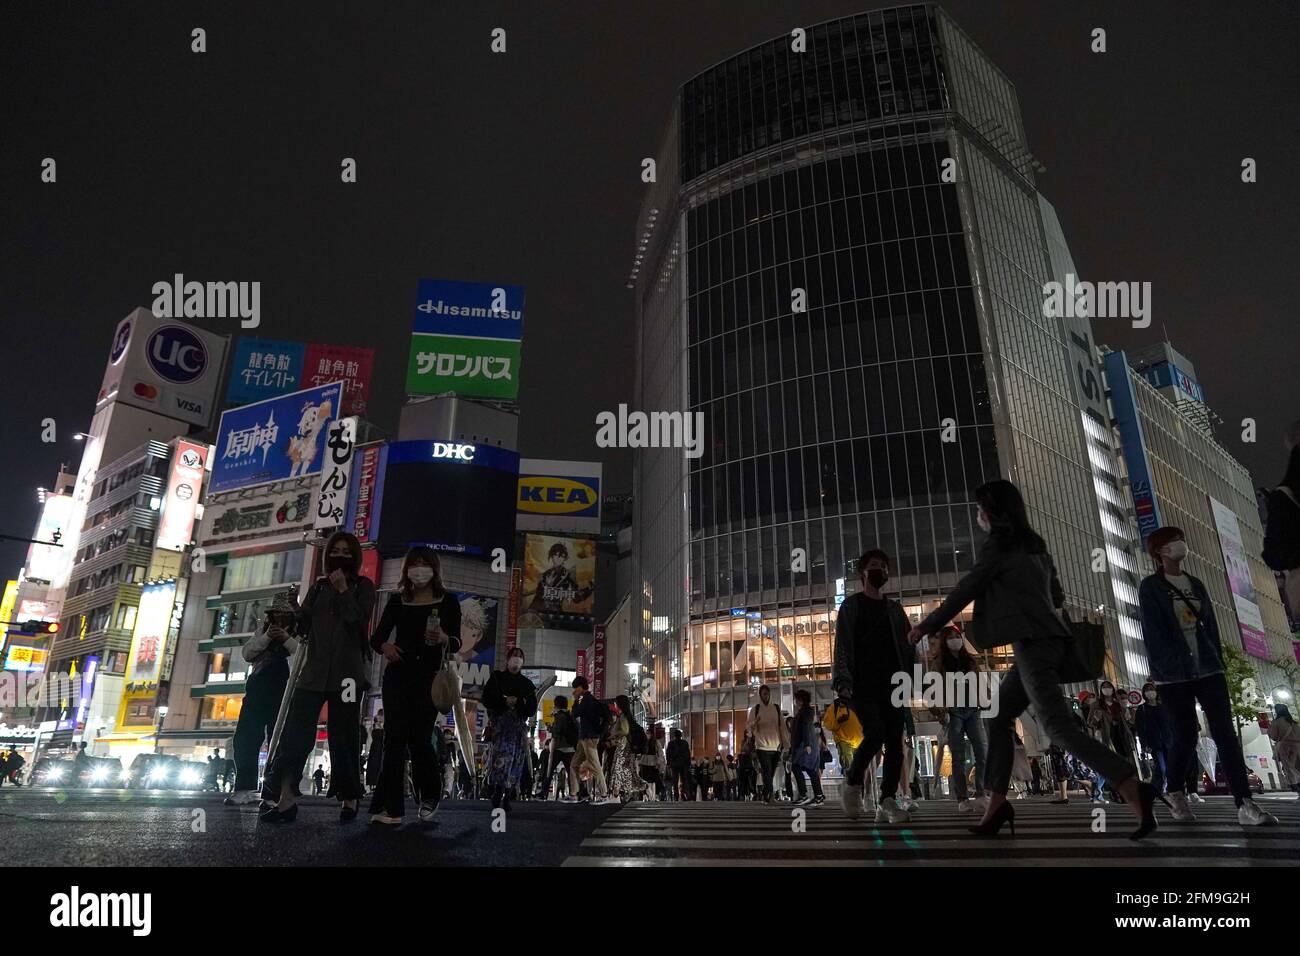 Tokyo, Japan. 7th May, 2021. Pedestrians cross a street at a popular nightlife area in Tokyo, Japan, May 7, 2021. Japanese Prime Minister Yoshihide Suga said on Friday the government is extending the state of emergency over COVID-19 in Tokyo, Osaka, Hyogo and Kyoto until the end of May, while expanding it to Aichi and Fukuoka prefectures. The emergency state was initially set to be eased next Tuesday. Credit: Christopher Jue/Xinhua/Alamy Live News Stock Photo